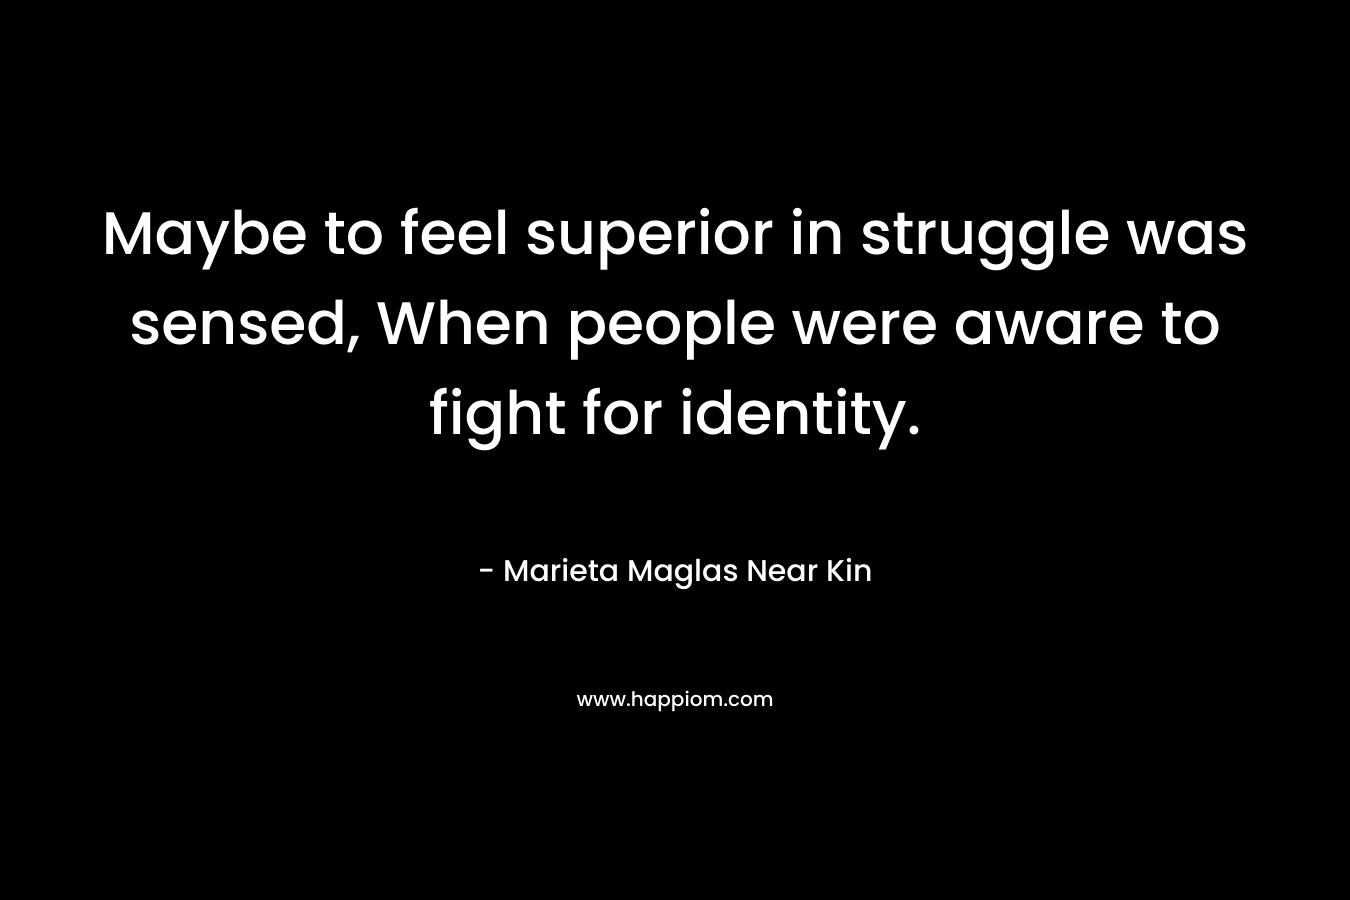 Maybe to feel superior in struggle was sensed, When people were aware to fight for identity. – Marieta Maglas Near Kin